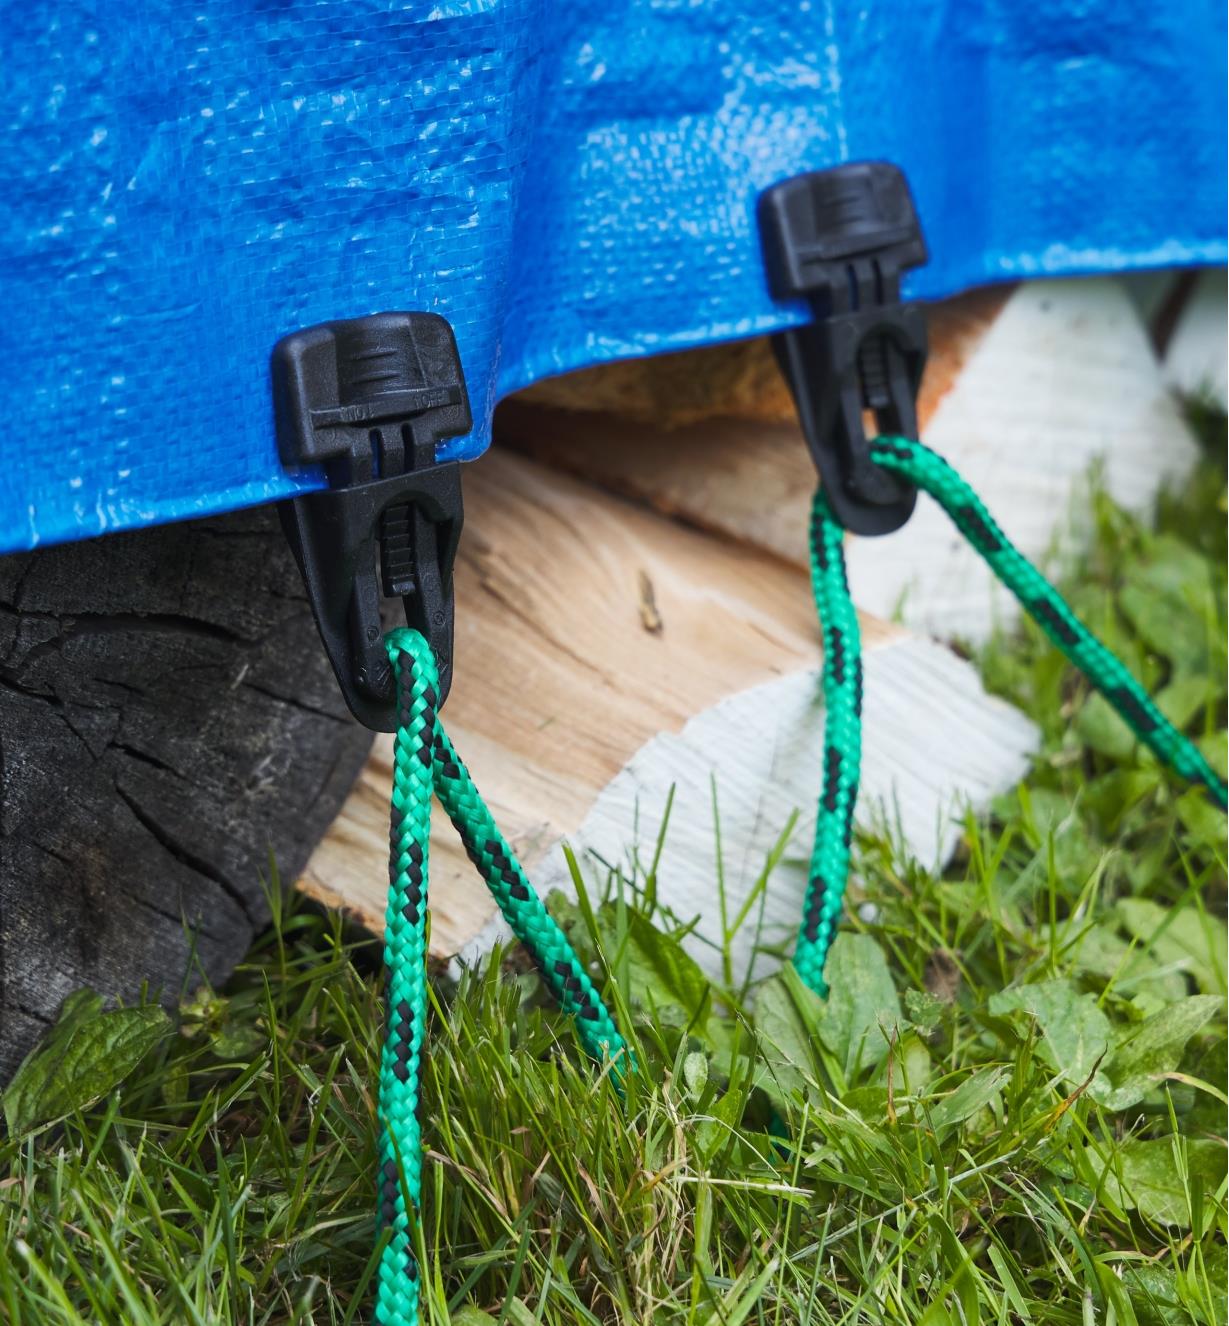 EasyKlip attached to a tarp covering chopped wood and secured to the ground with rope